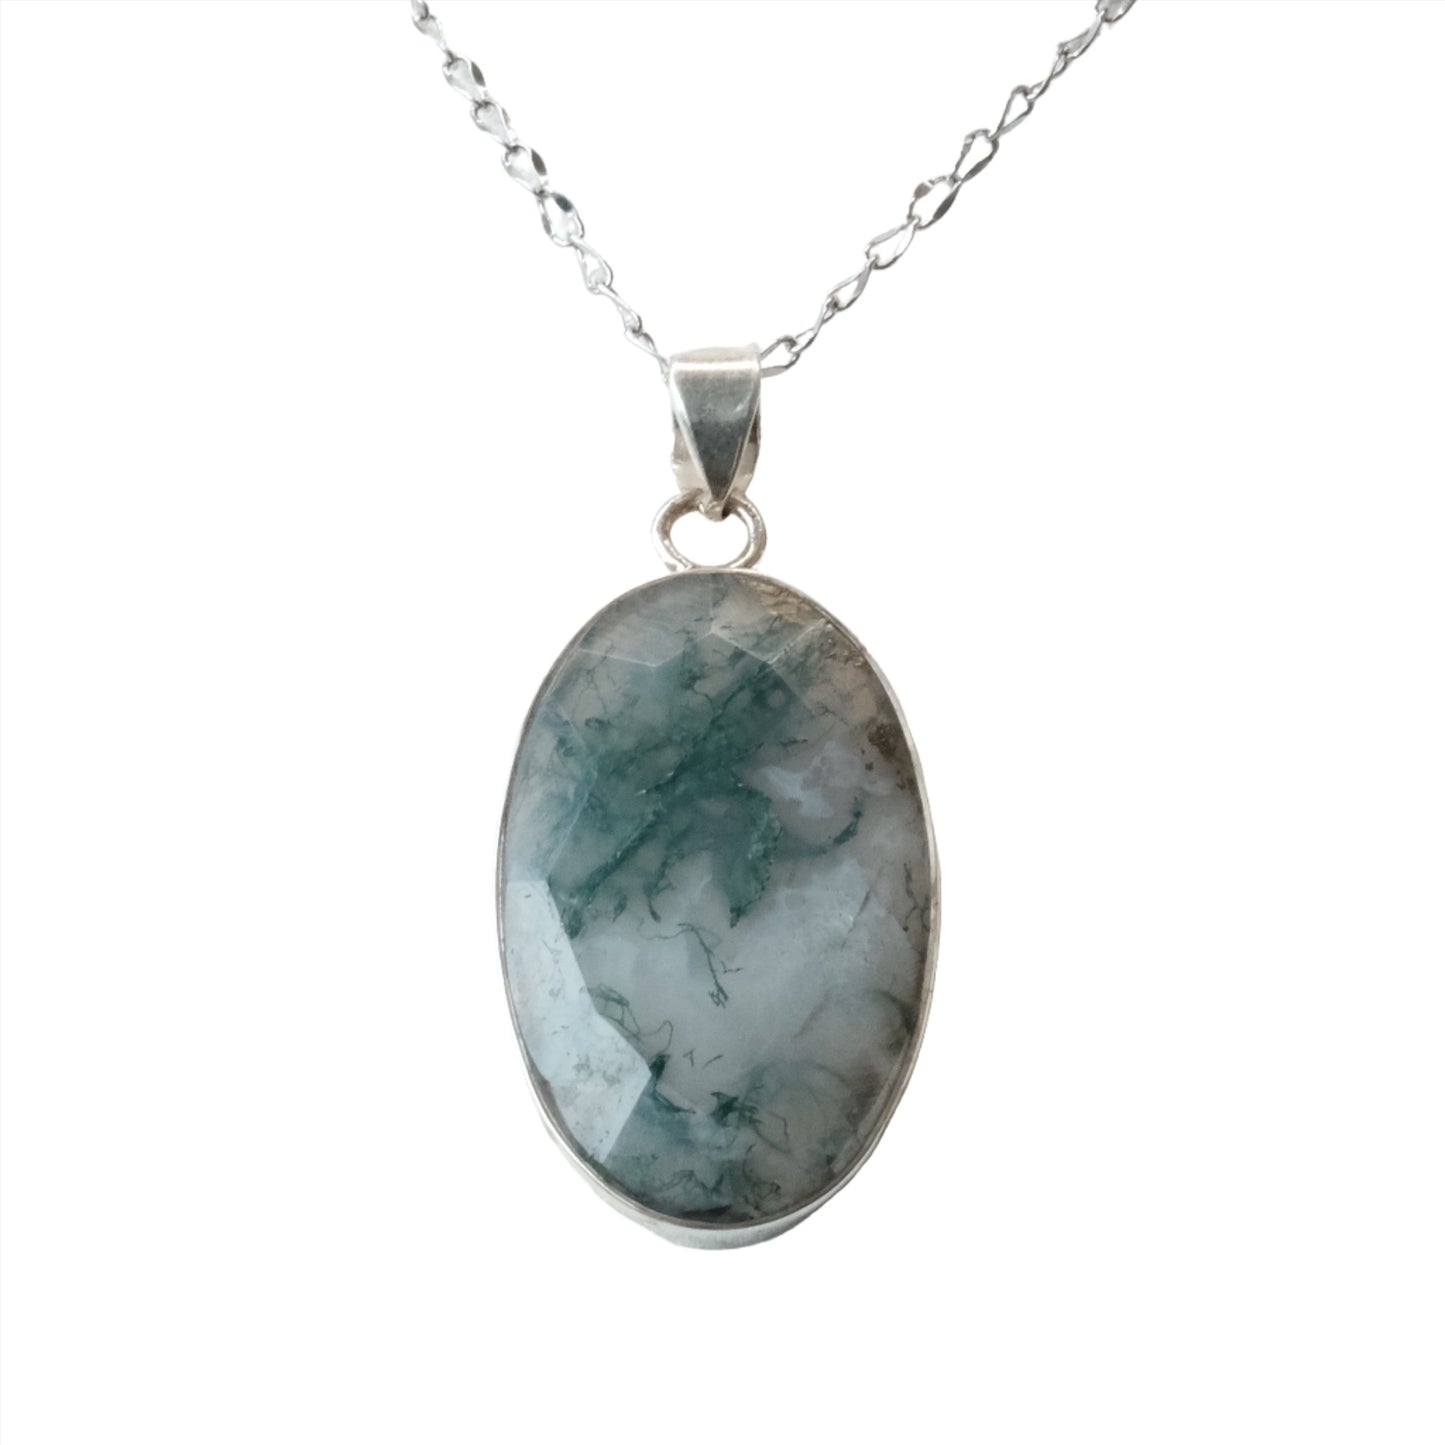 Moss Agate Oval Sterling Silver Pendant Necklace